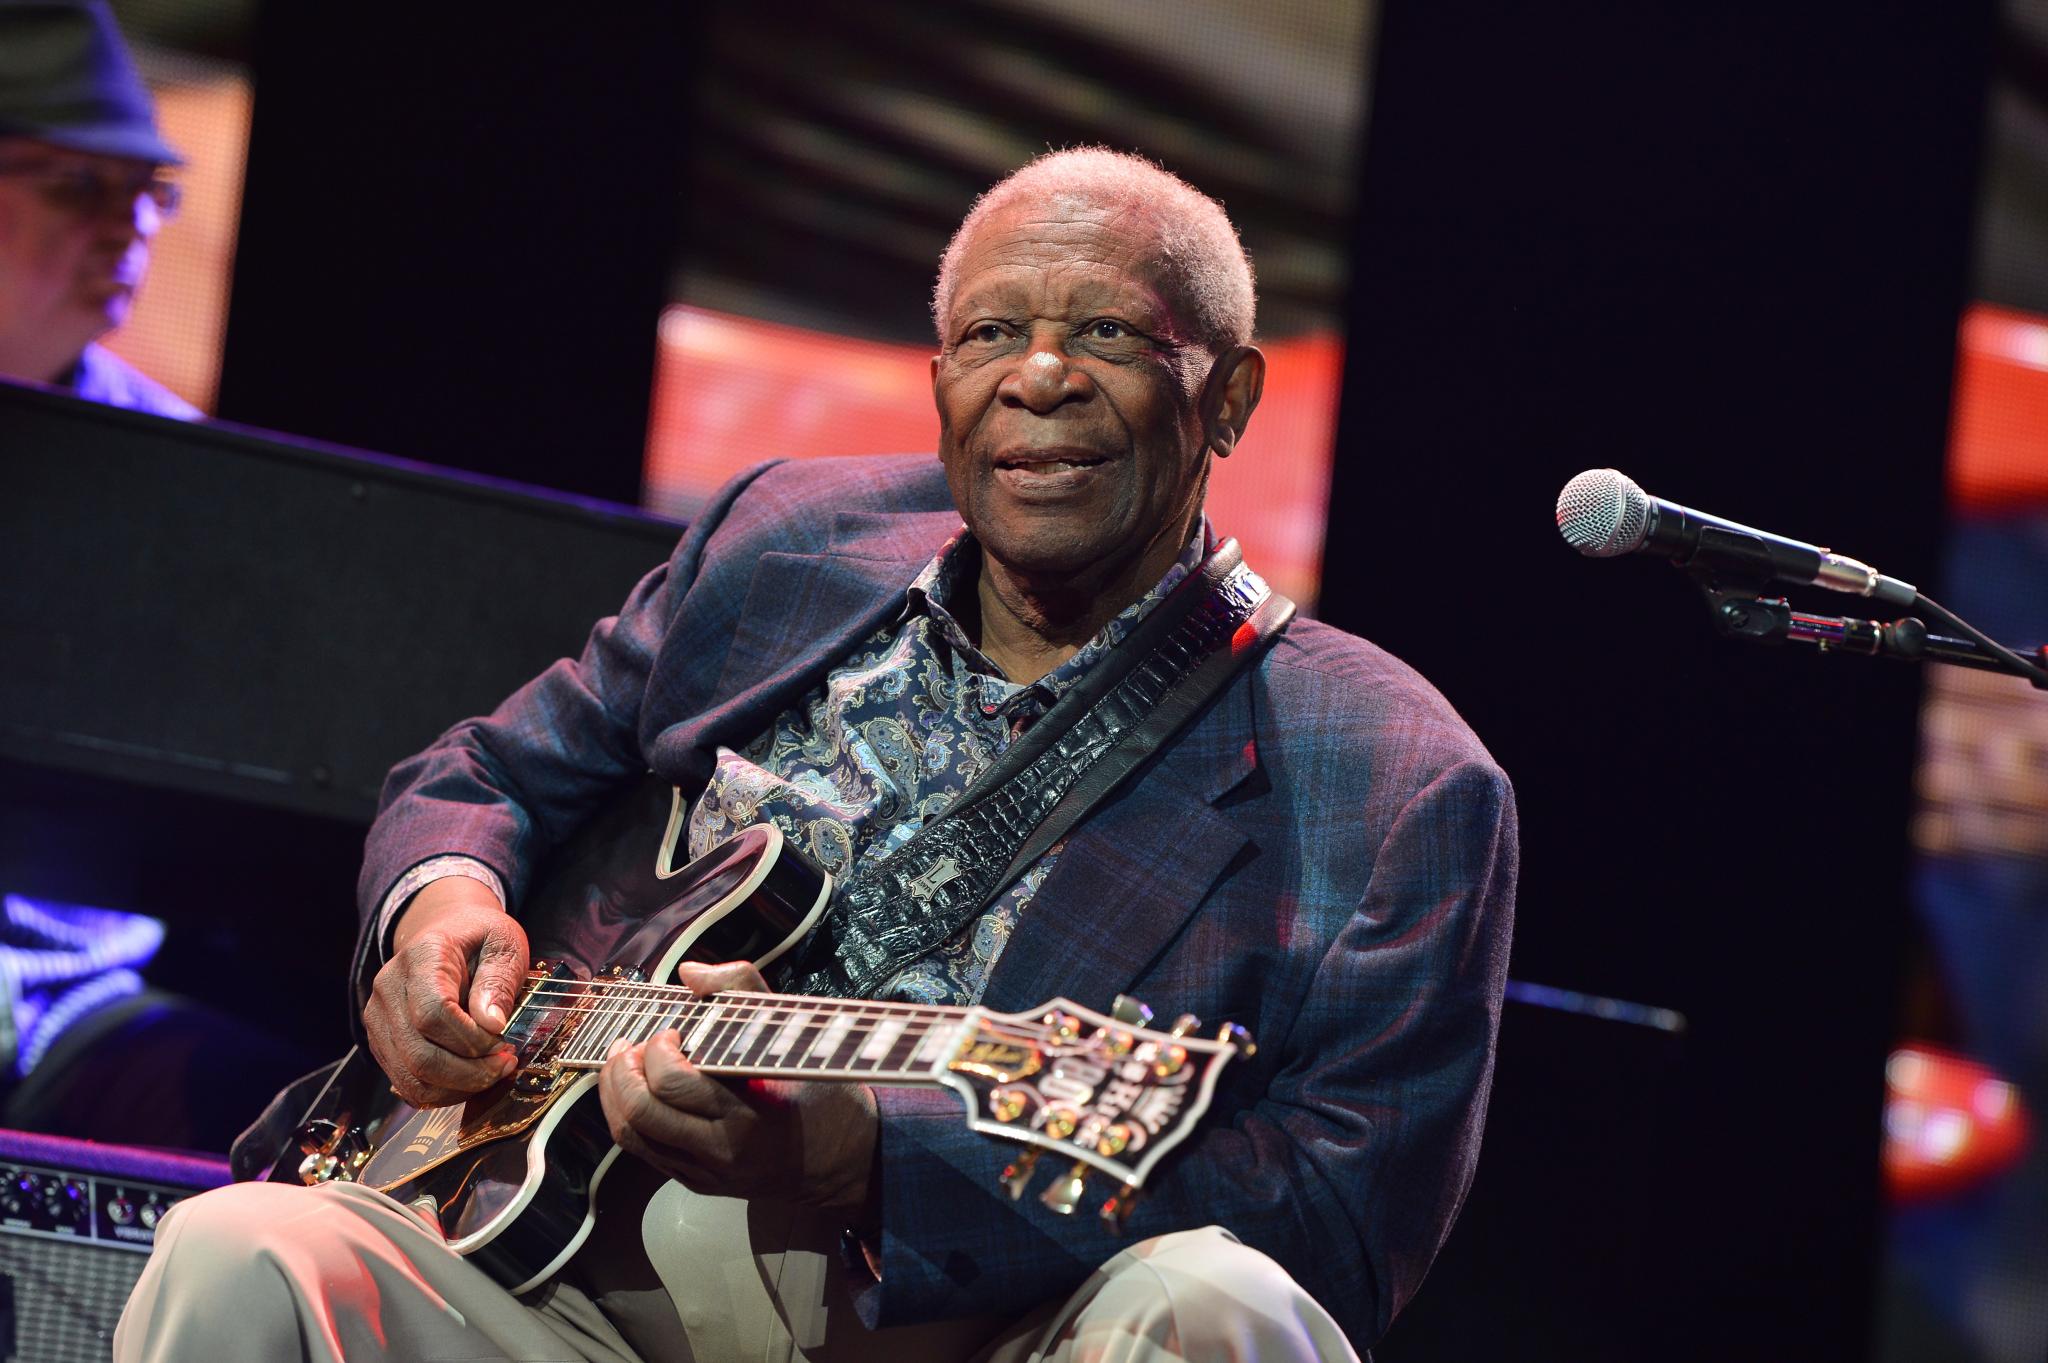 B.B King Reveals That He is Under Hospice Care in Las Vegas Home